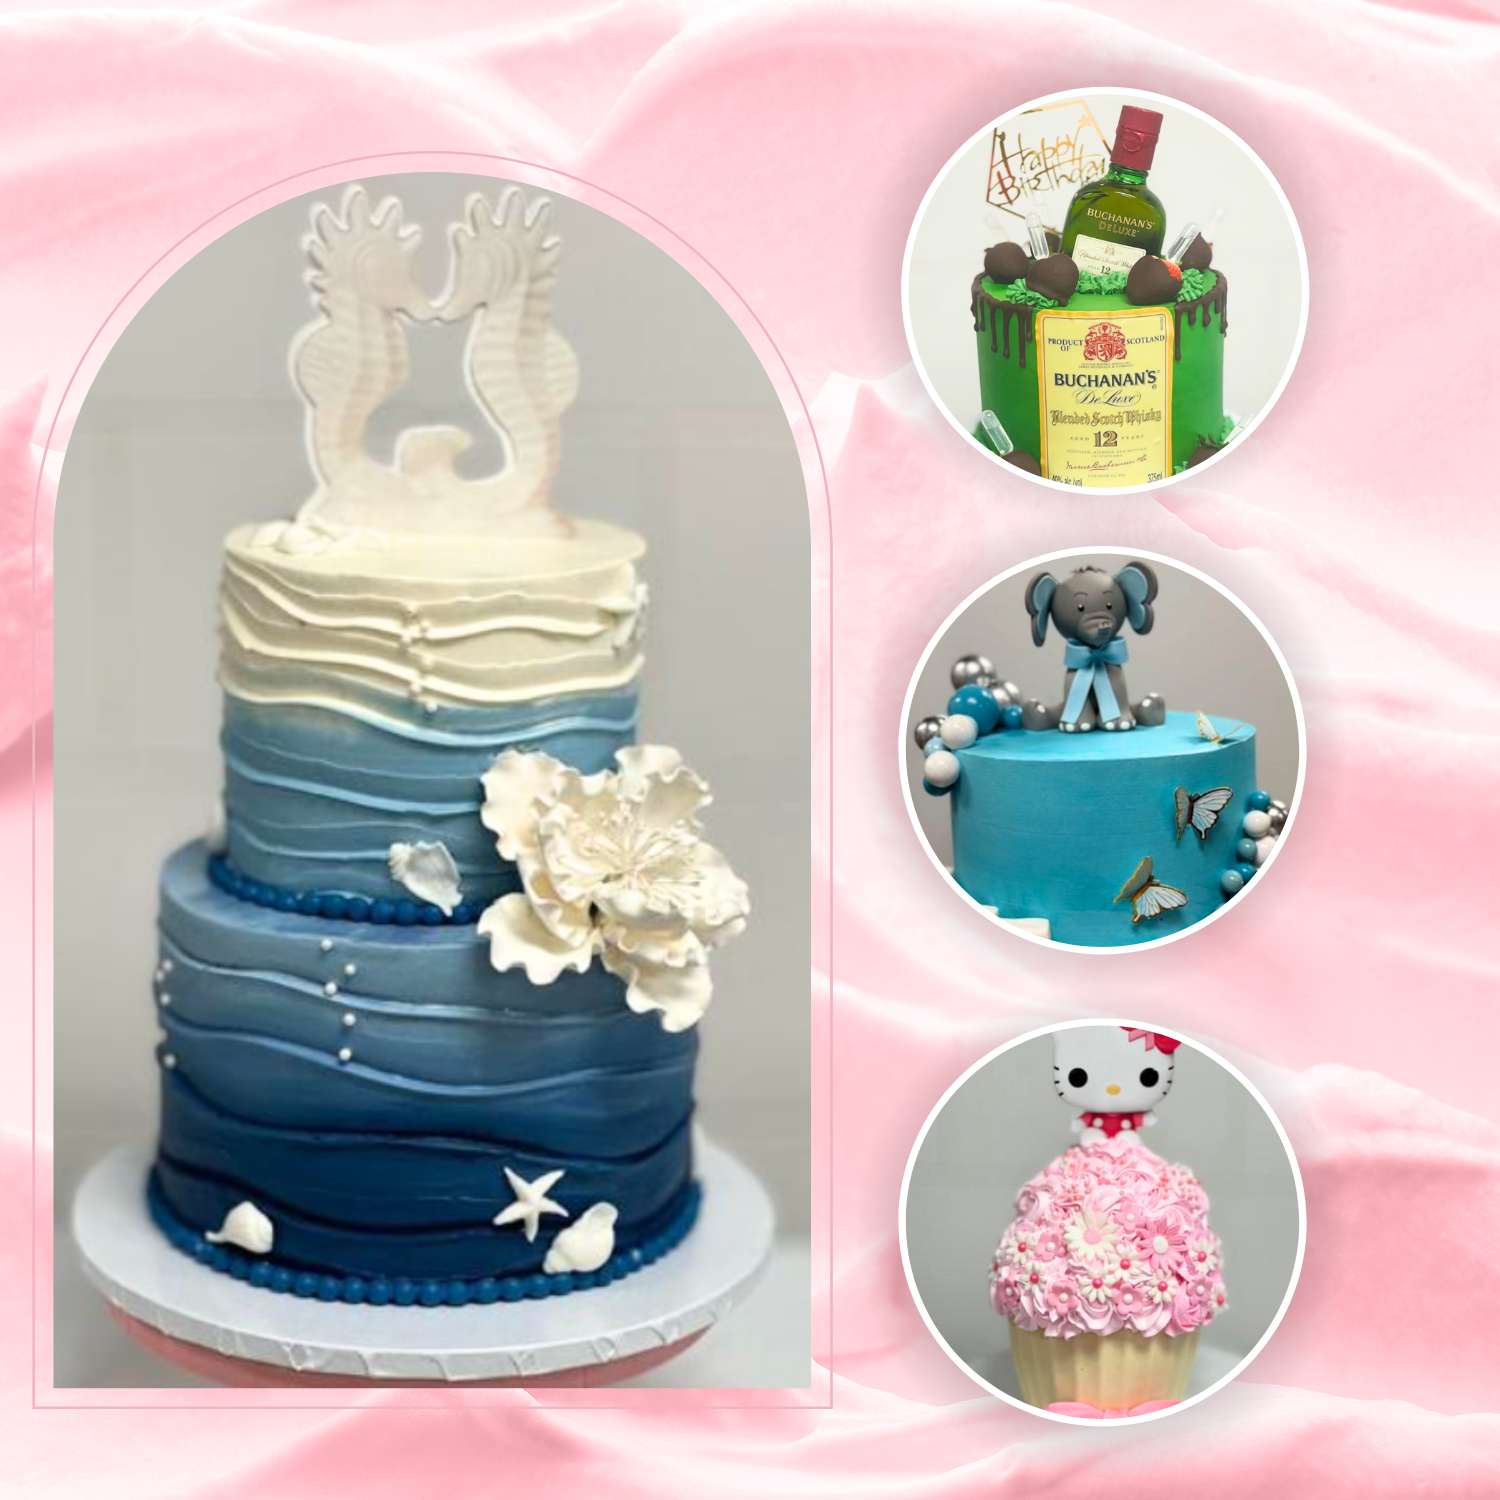 Cake Creations by Michelle (@cakecreationsbym) • Instagram photos and videos